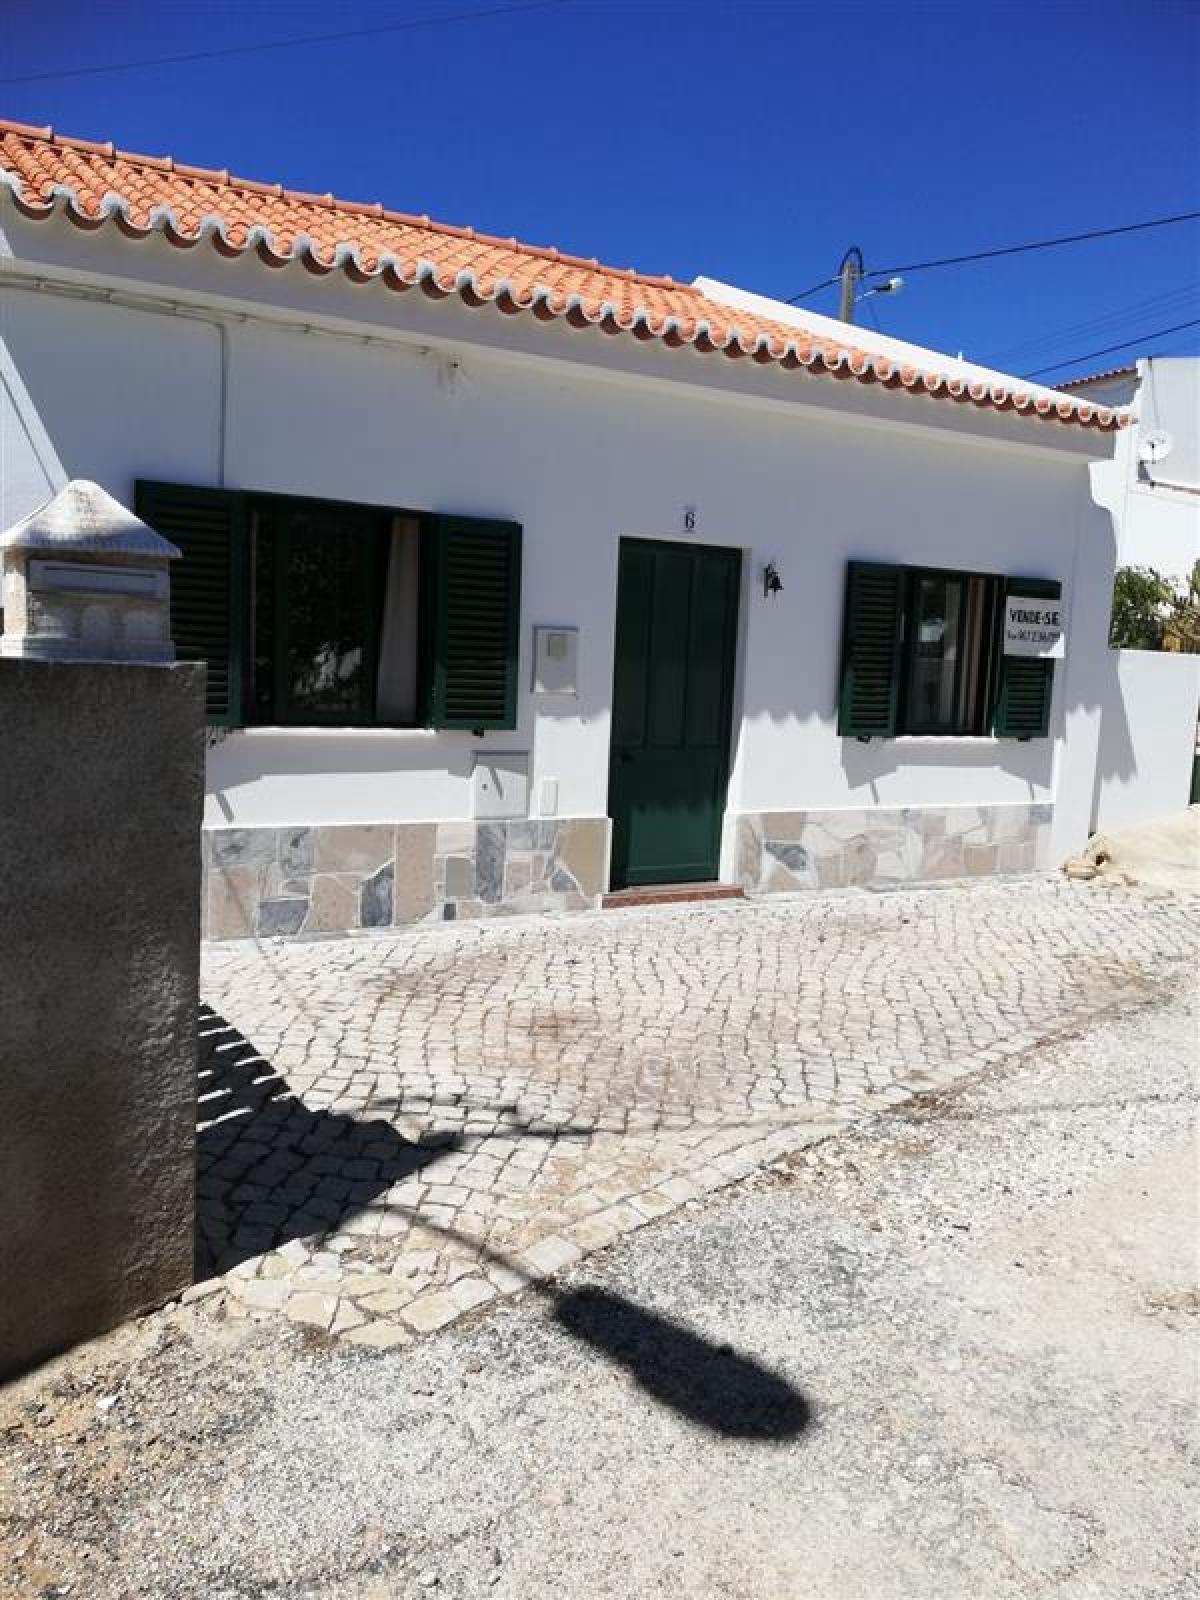 Picture of Vacation Cottages For Sale in Almandena, Faro, Portugal